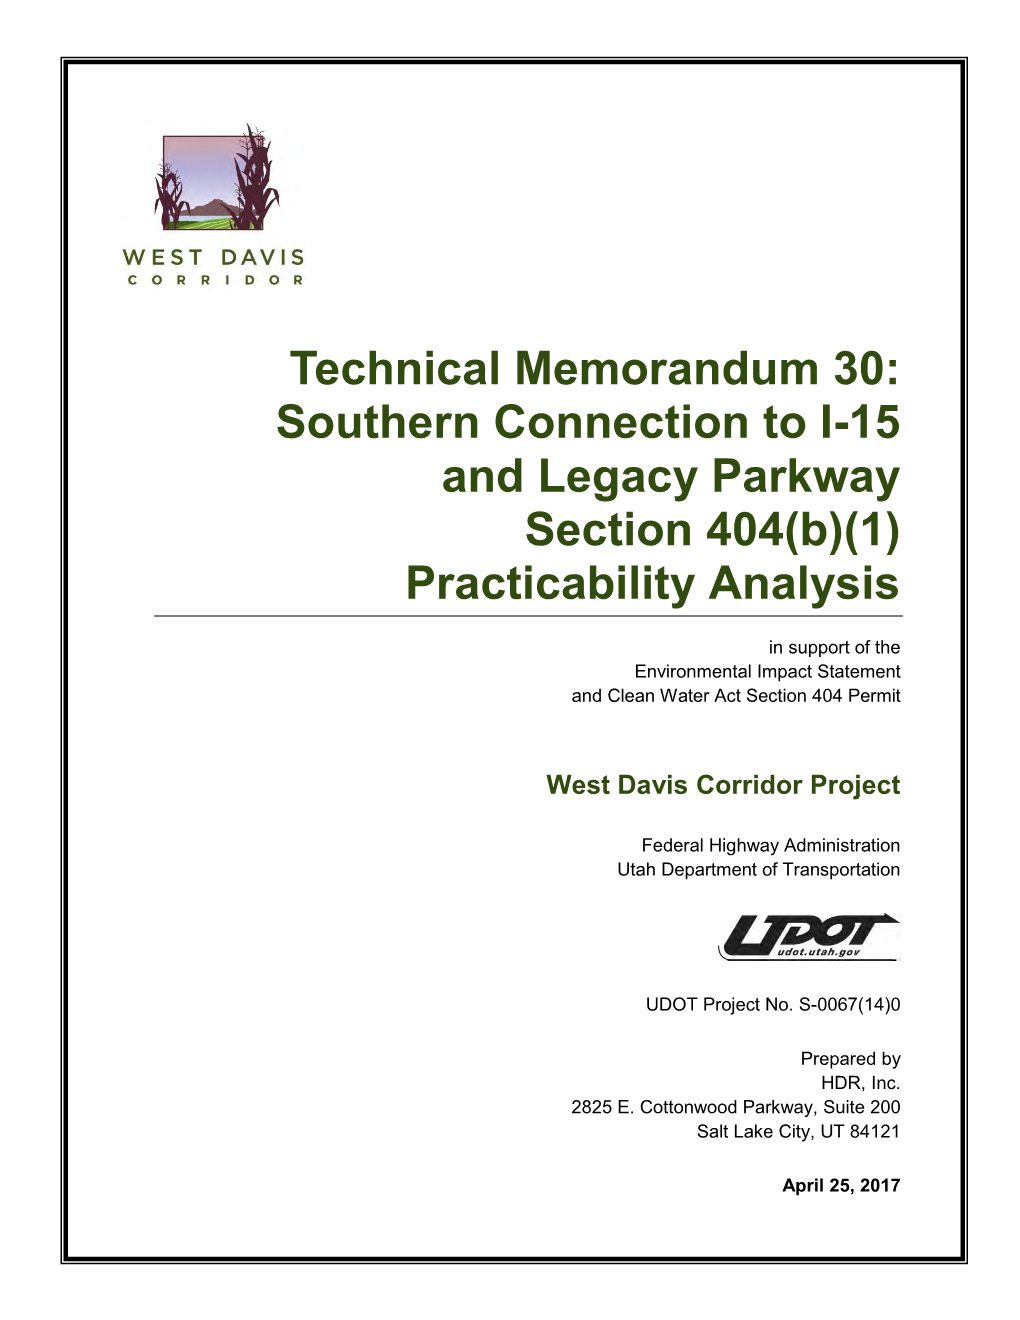 Southern Connection to I-15 and Legacy Parkway Section 404(B)(1) Practicability Analysis